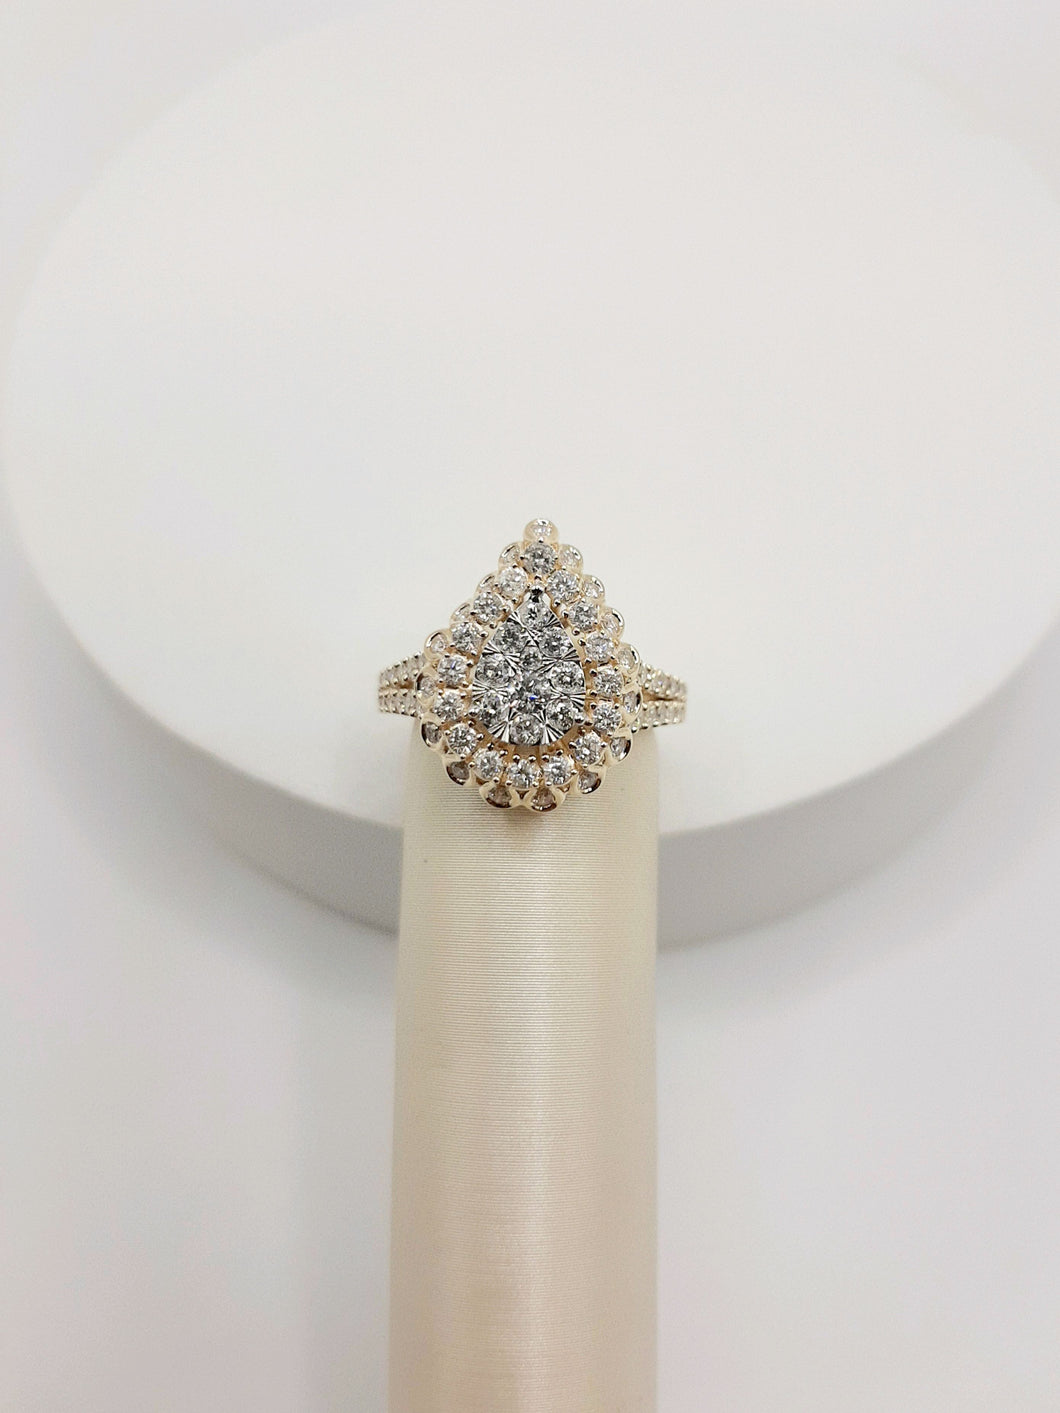 10Kt Two Tone Pear Shape Cluster Ring Featuring 1.0 Carats of Natural Round Brilliant Cut Diamonds on A Split Shank